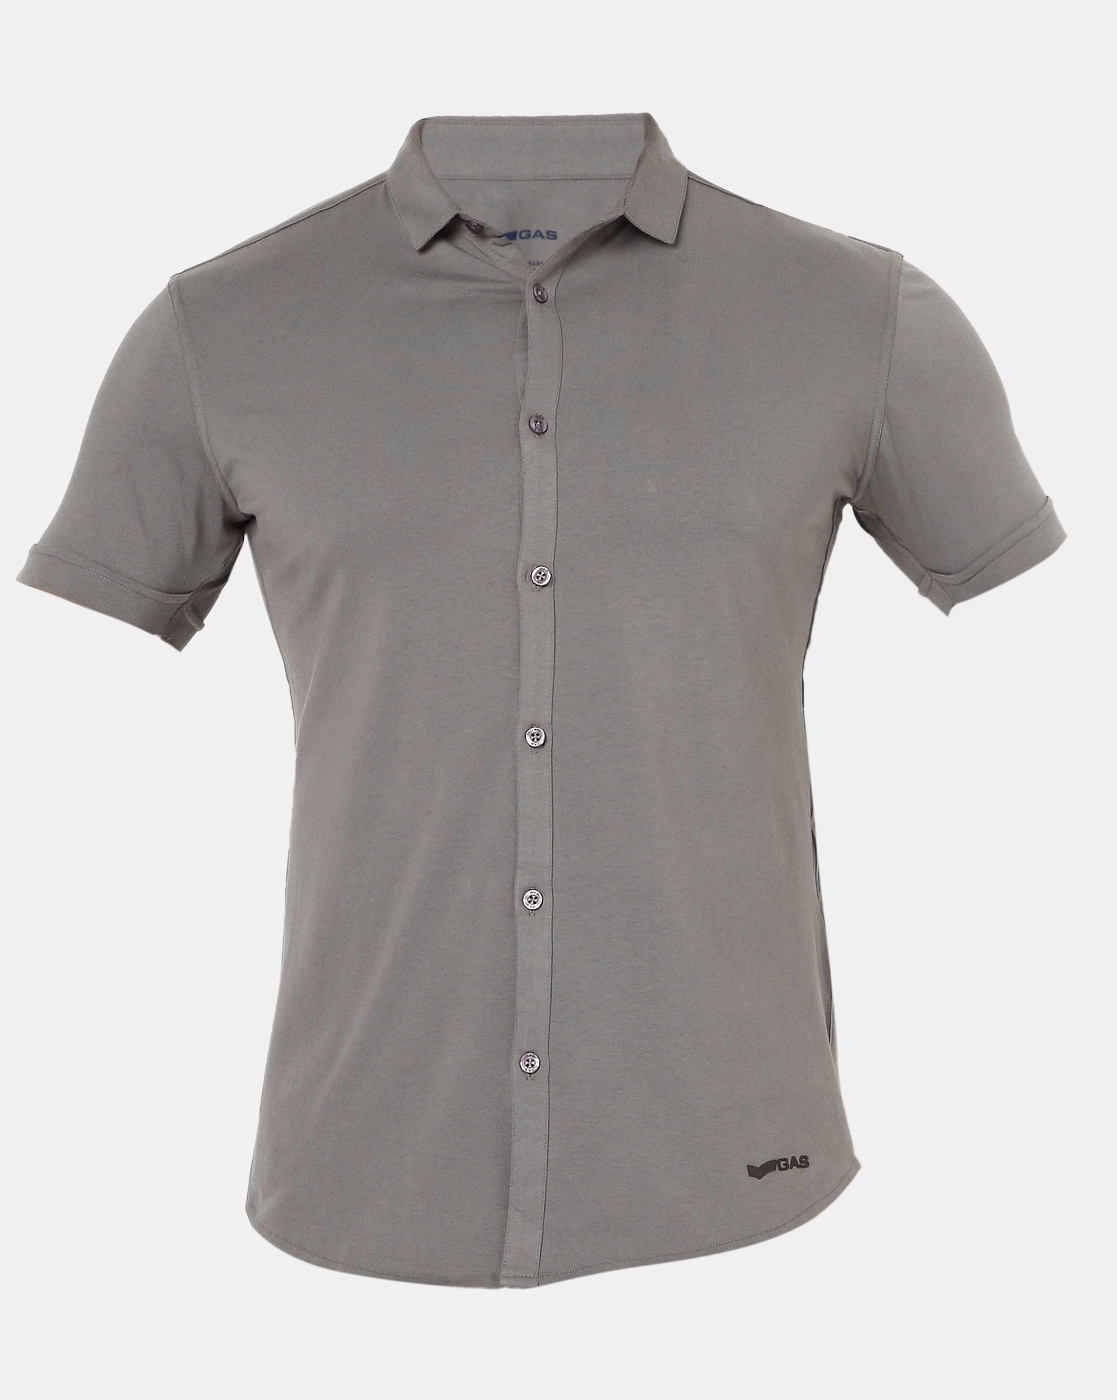 GAS | Men's Knit Shirt S/S In Grey Solid Shirt 0